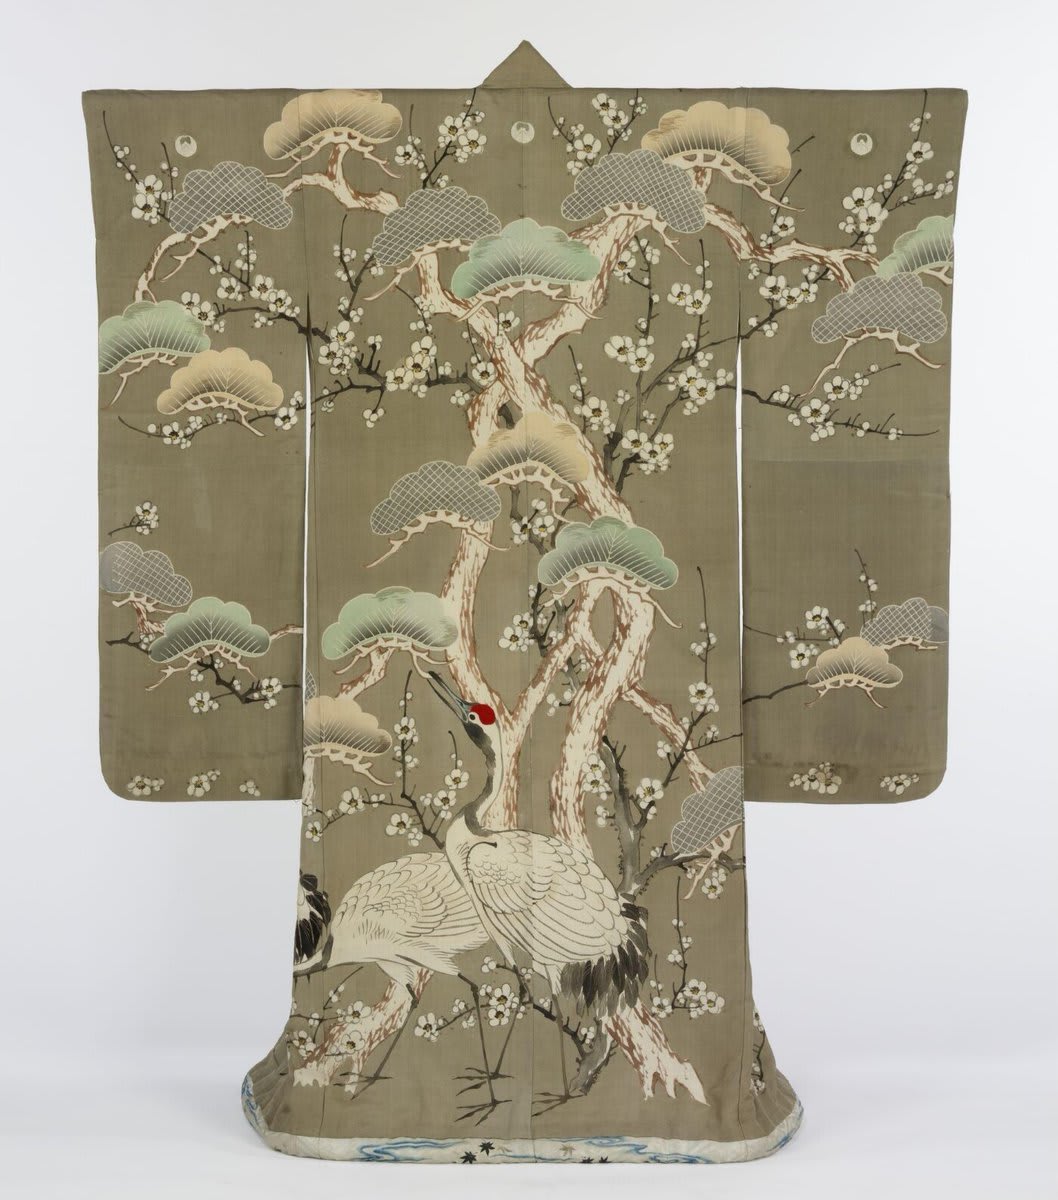 This stunning 19th century kimono illustrates the close connection between painting and textiles in Japan. The surface of the garment acts as a scroll for the hand-painted cranes and plum blossoms. Discover More: